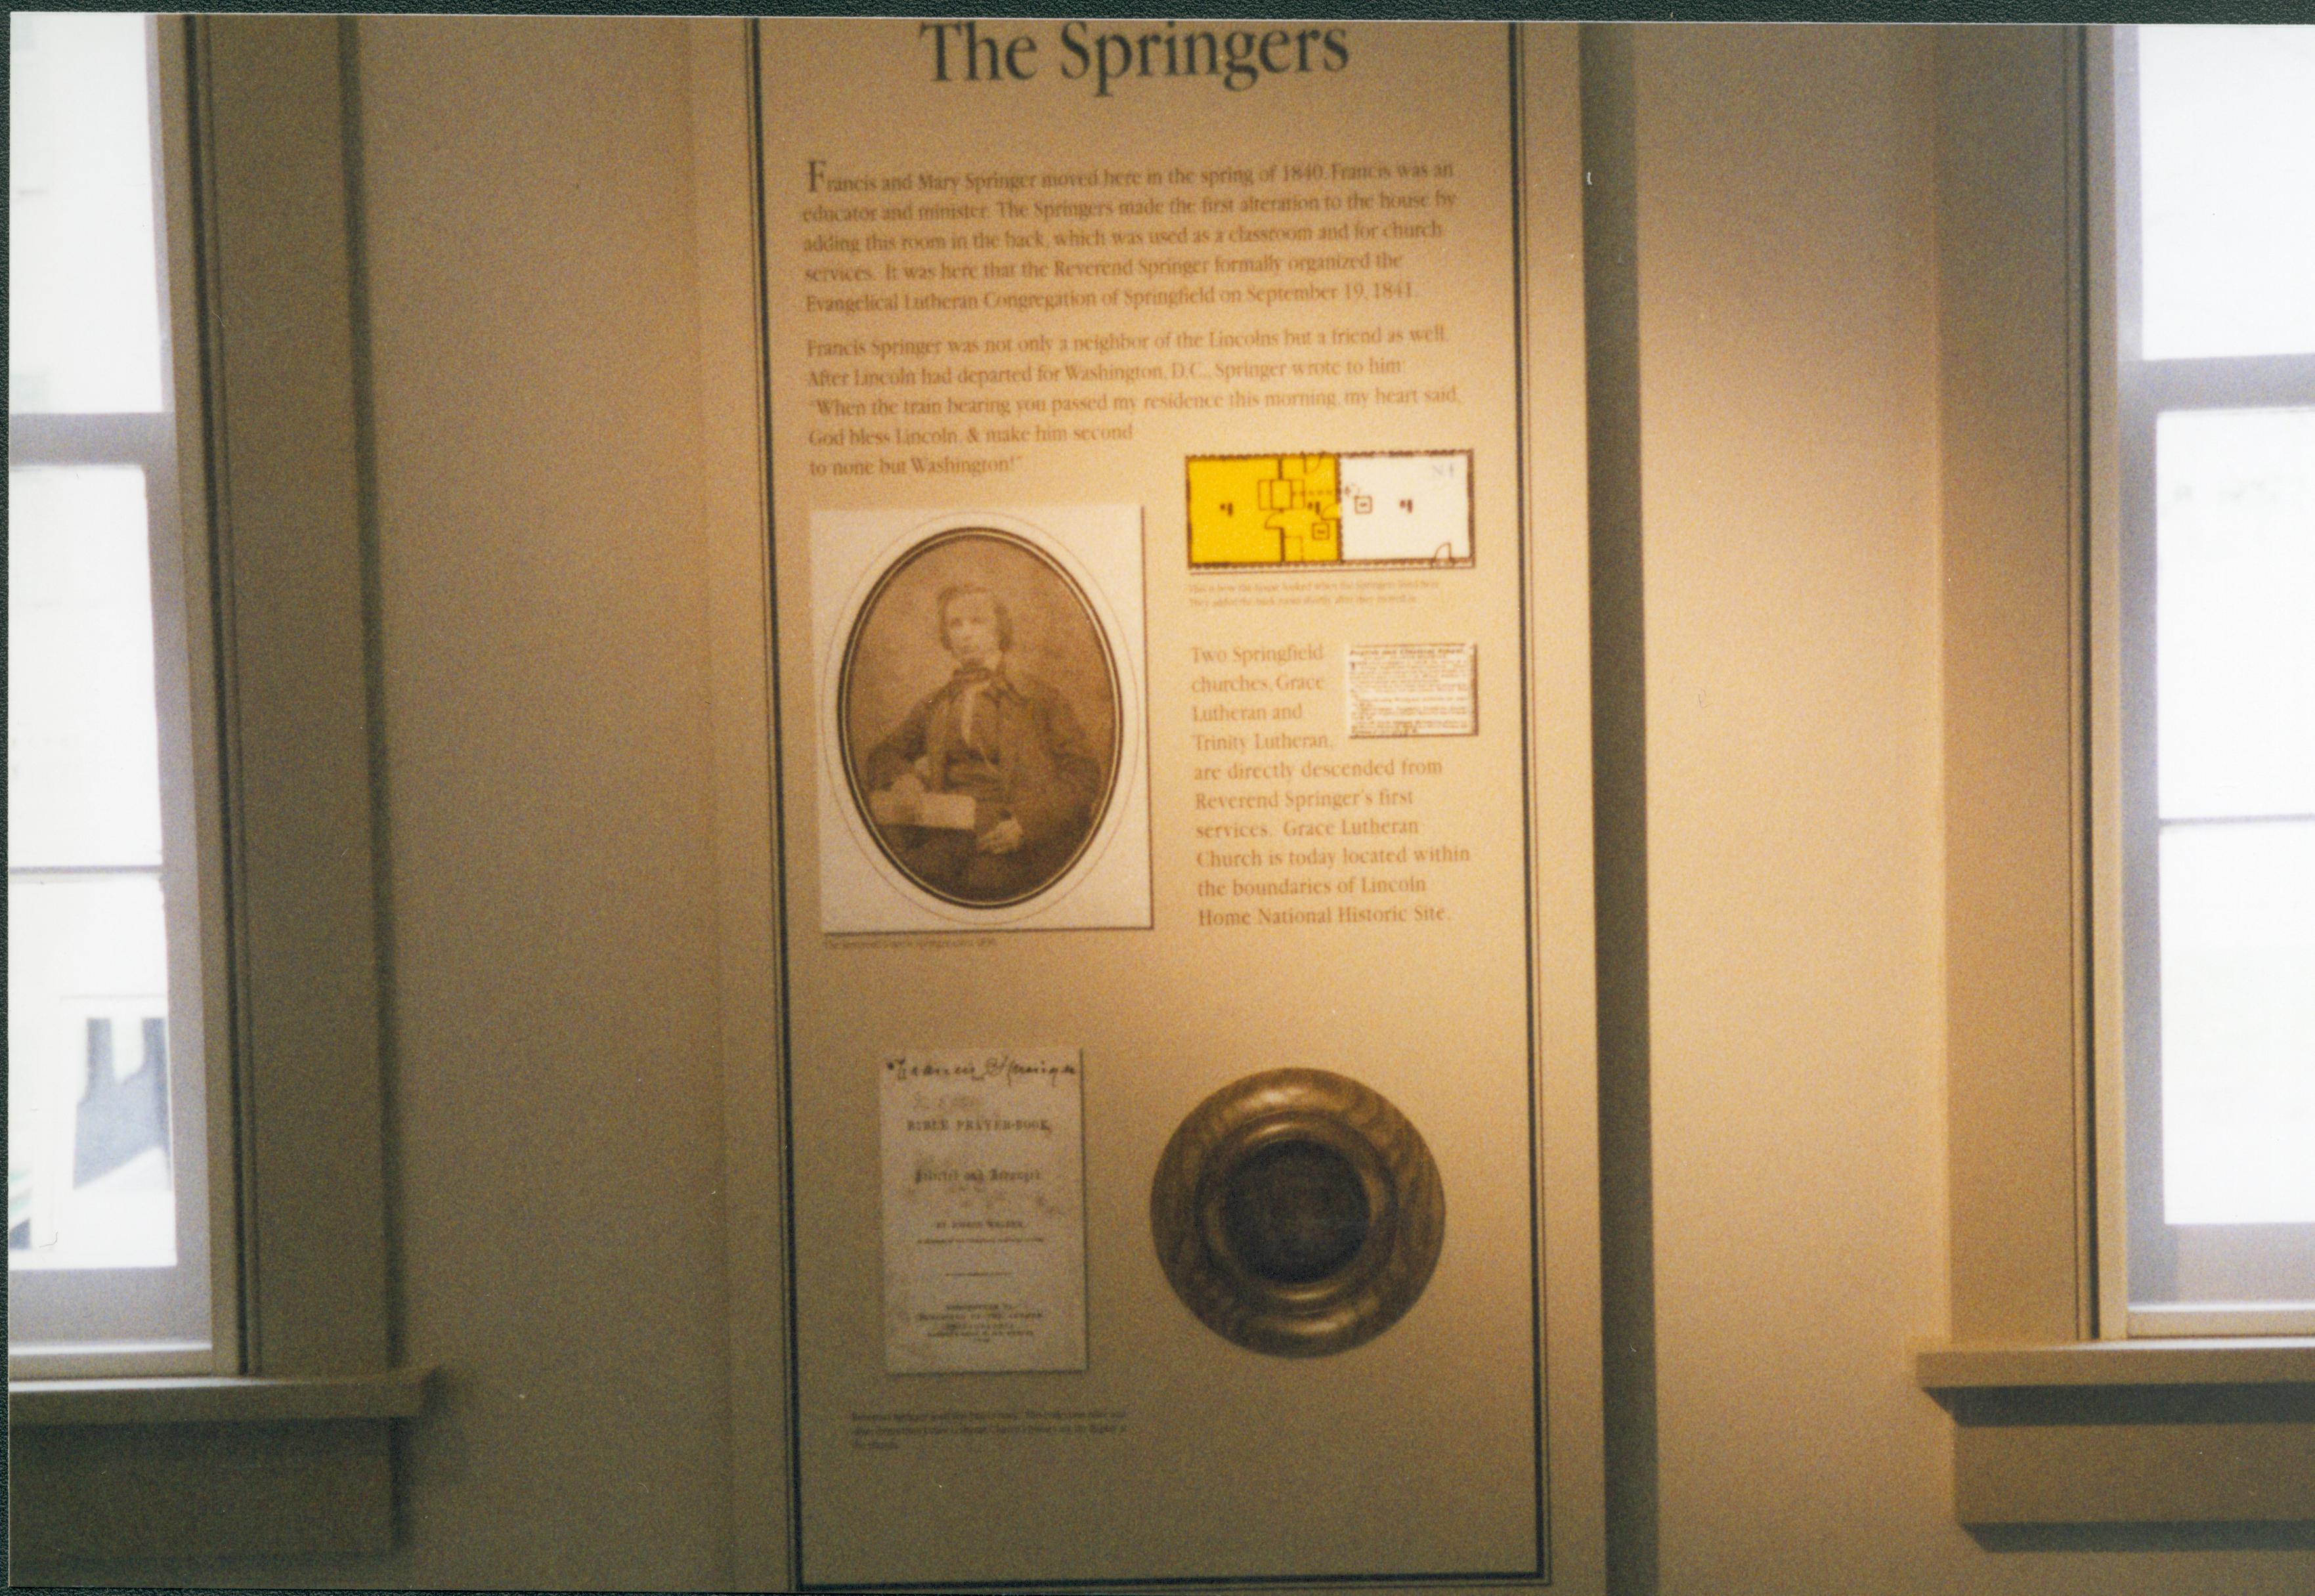 The Springers exhibit LIHO NHS- Arnold House Exhibit, Roll 2001-2, exp 24 Arnold House, exhibit